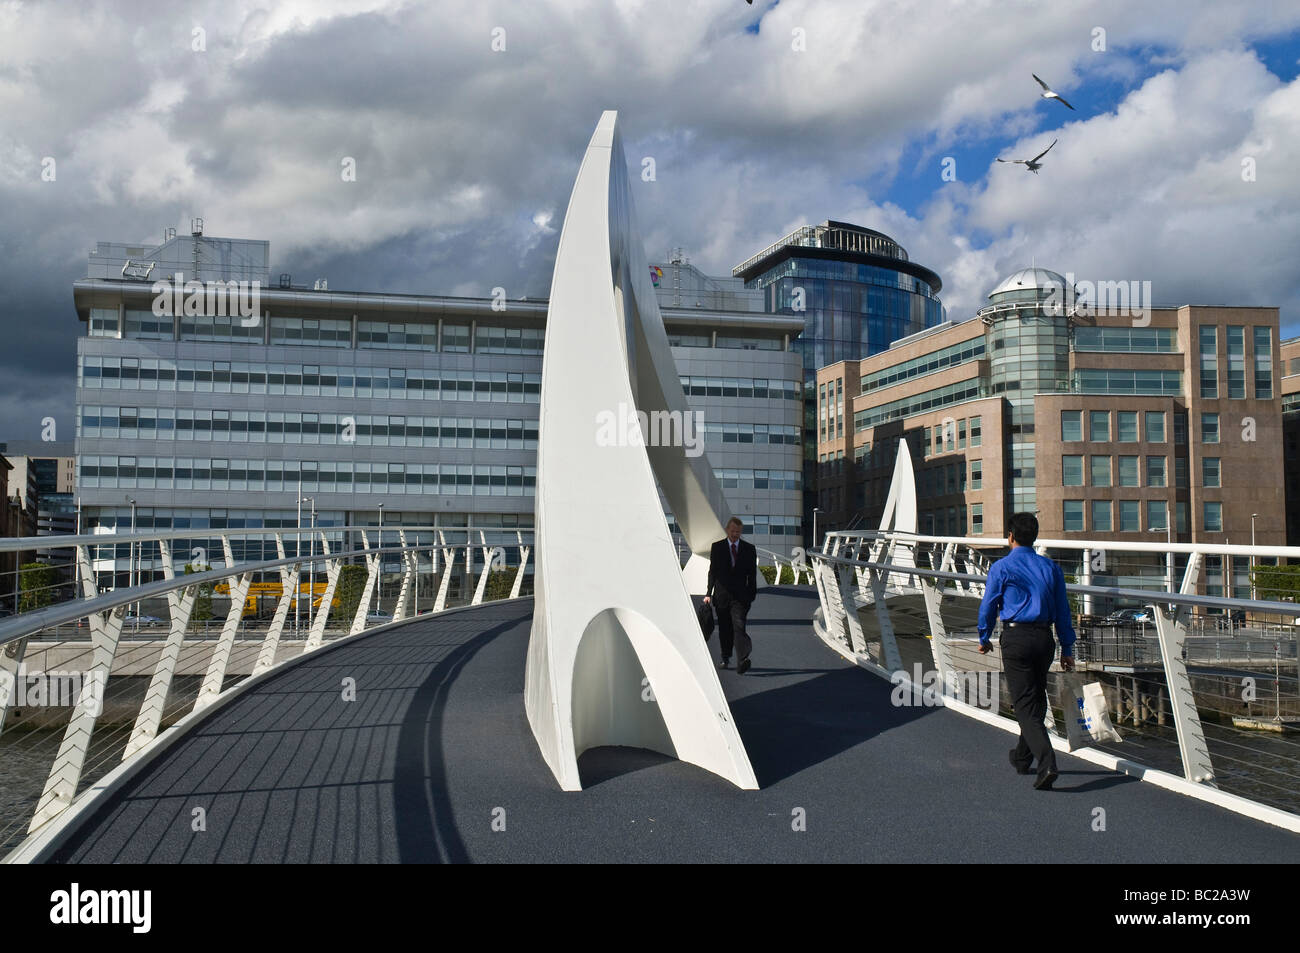 dh Broomielaw Tradeston bridge RIVER CLYDE BRIDGES GLASGOW CITY People walking over modern scottish architecture squiggly scotland waterfront cities Stock Photo